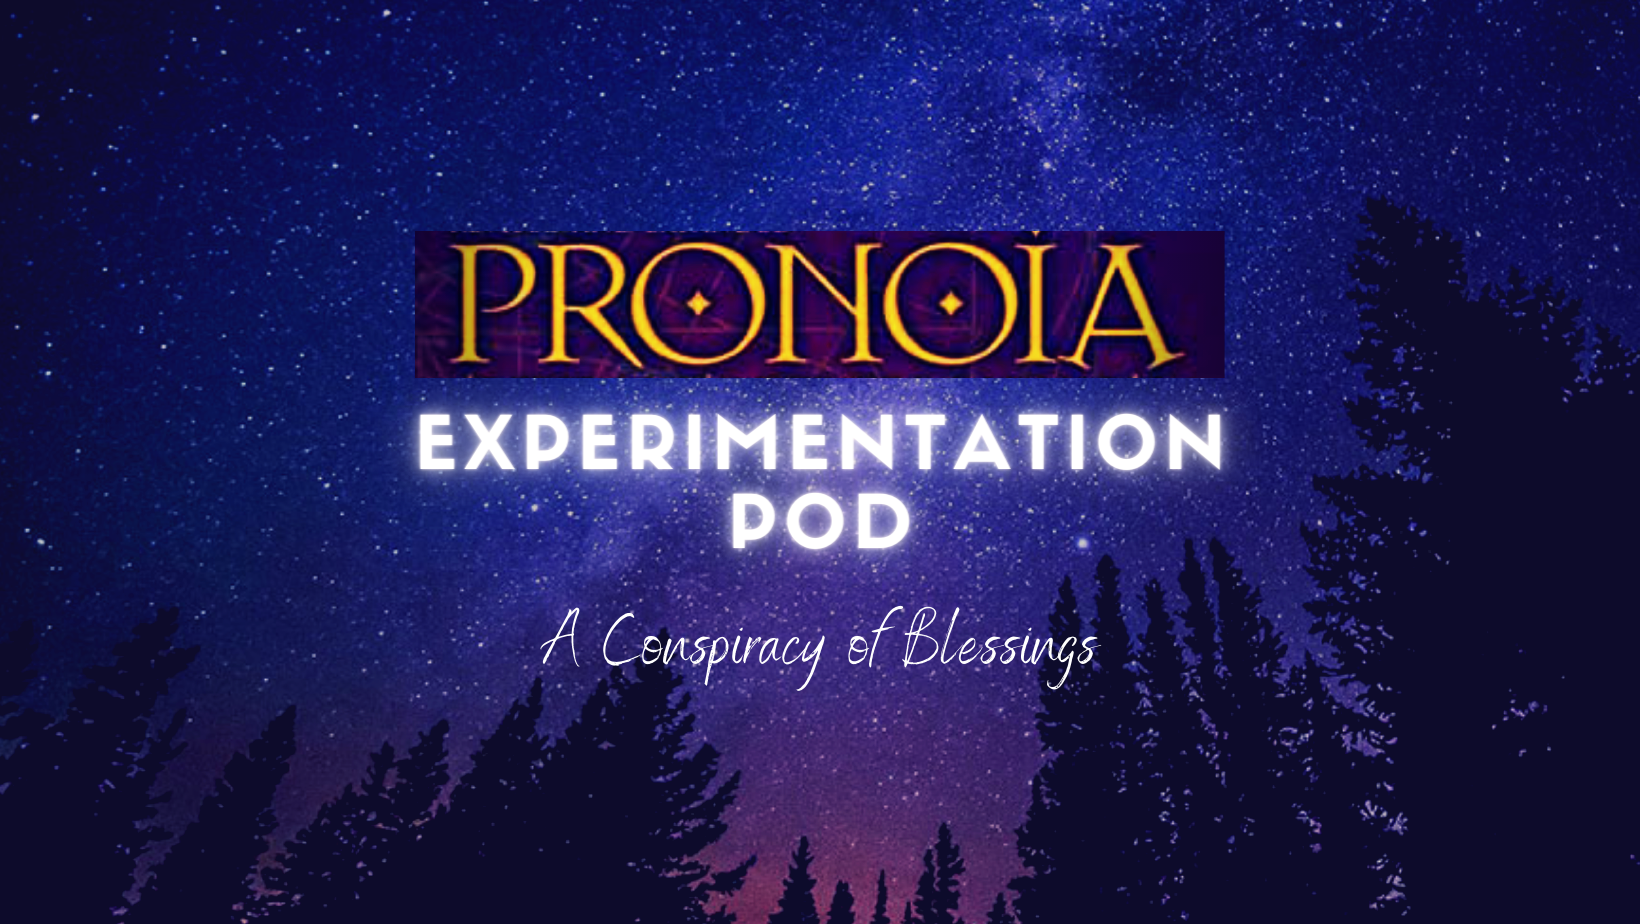 Tall trees in silhouette against a starry sky. Words say Pronoia Experimentation Pod, A Conspiracy of Blessings